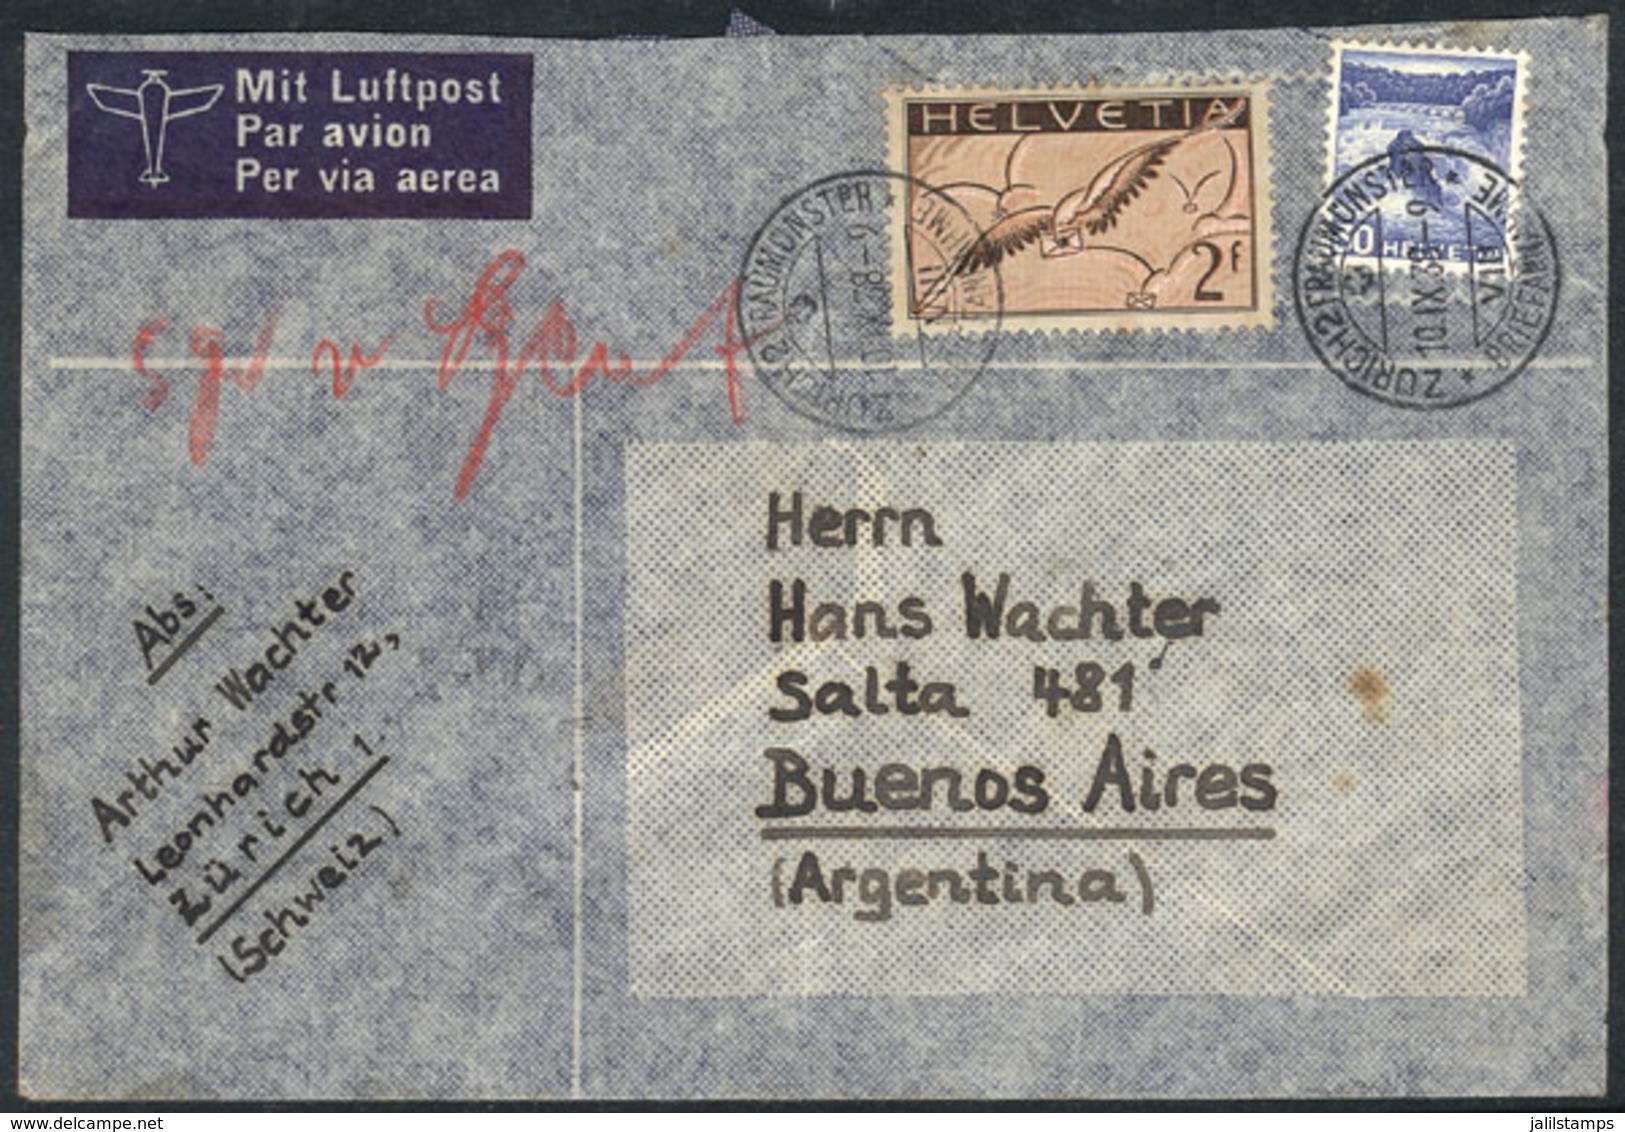 885 SWITZERLAND: Airmail Cover Franked With 2.30Fr., Sent From Zürich To Argentina On 10/SE/1938, VF! - ...-1845 Prephilately